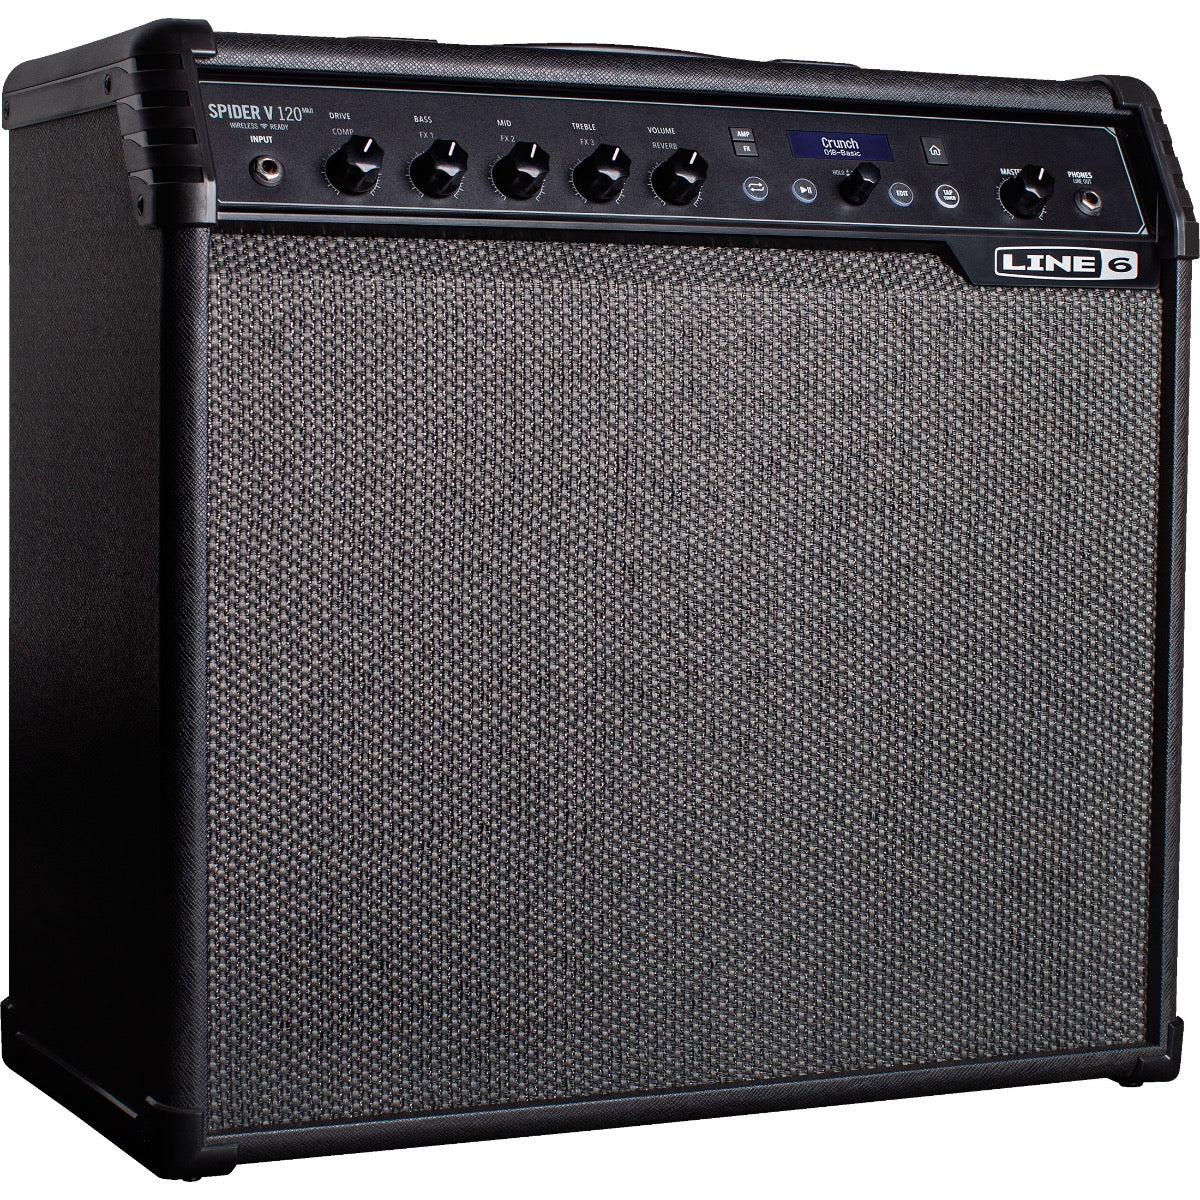 Perspective view of Line 6 Spider V 120 MkII Guitar Amplifier showing front and left side